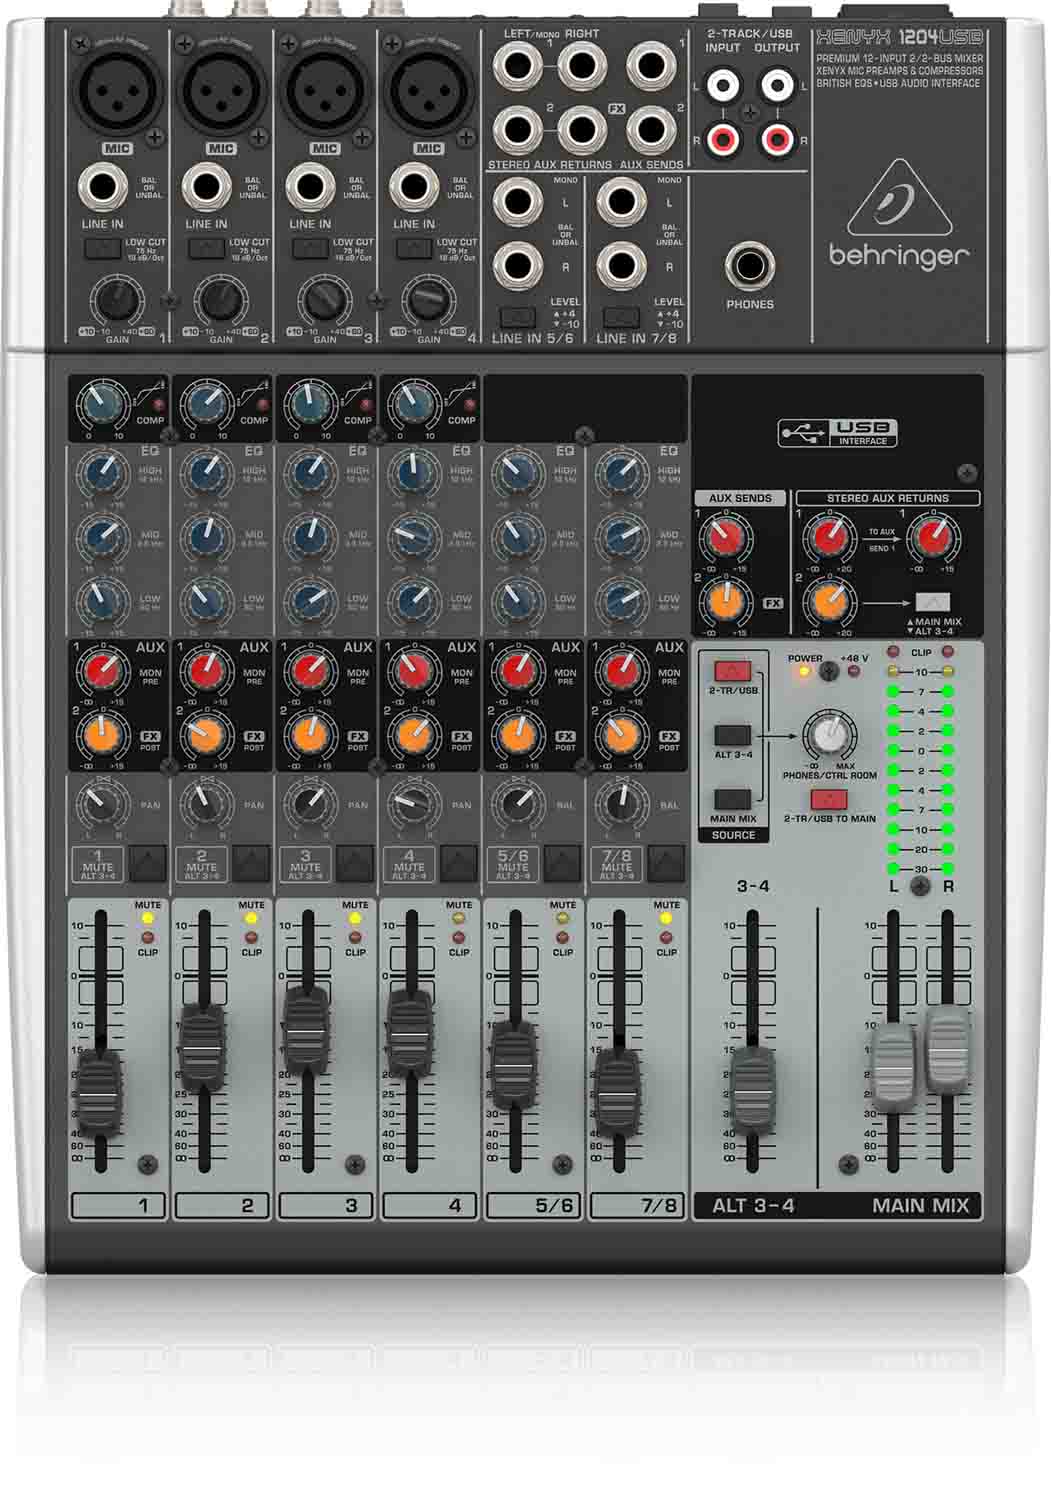 Behringer 1204USB 12-Input 2/2-Bus Audio Mixer with XENYX Mic Preamps, Compressors and USB/Audio Interface - Hollywood DJ